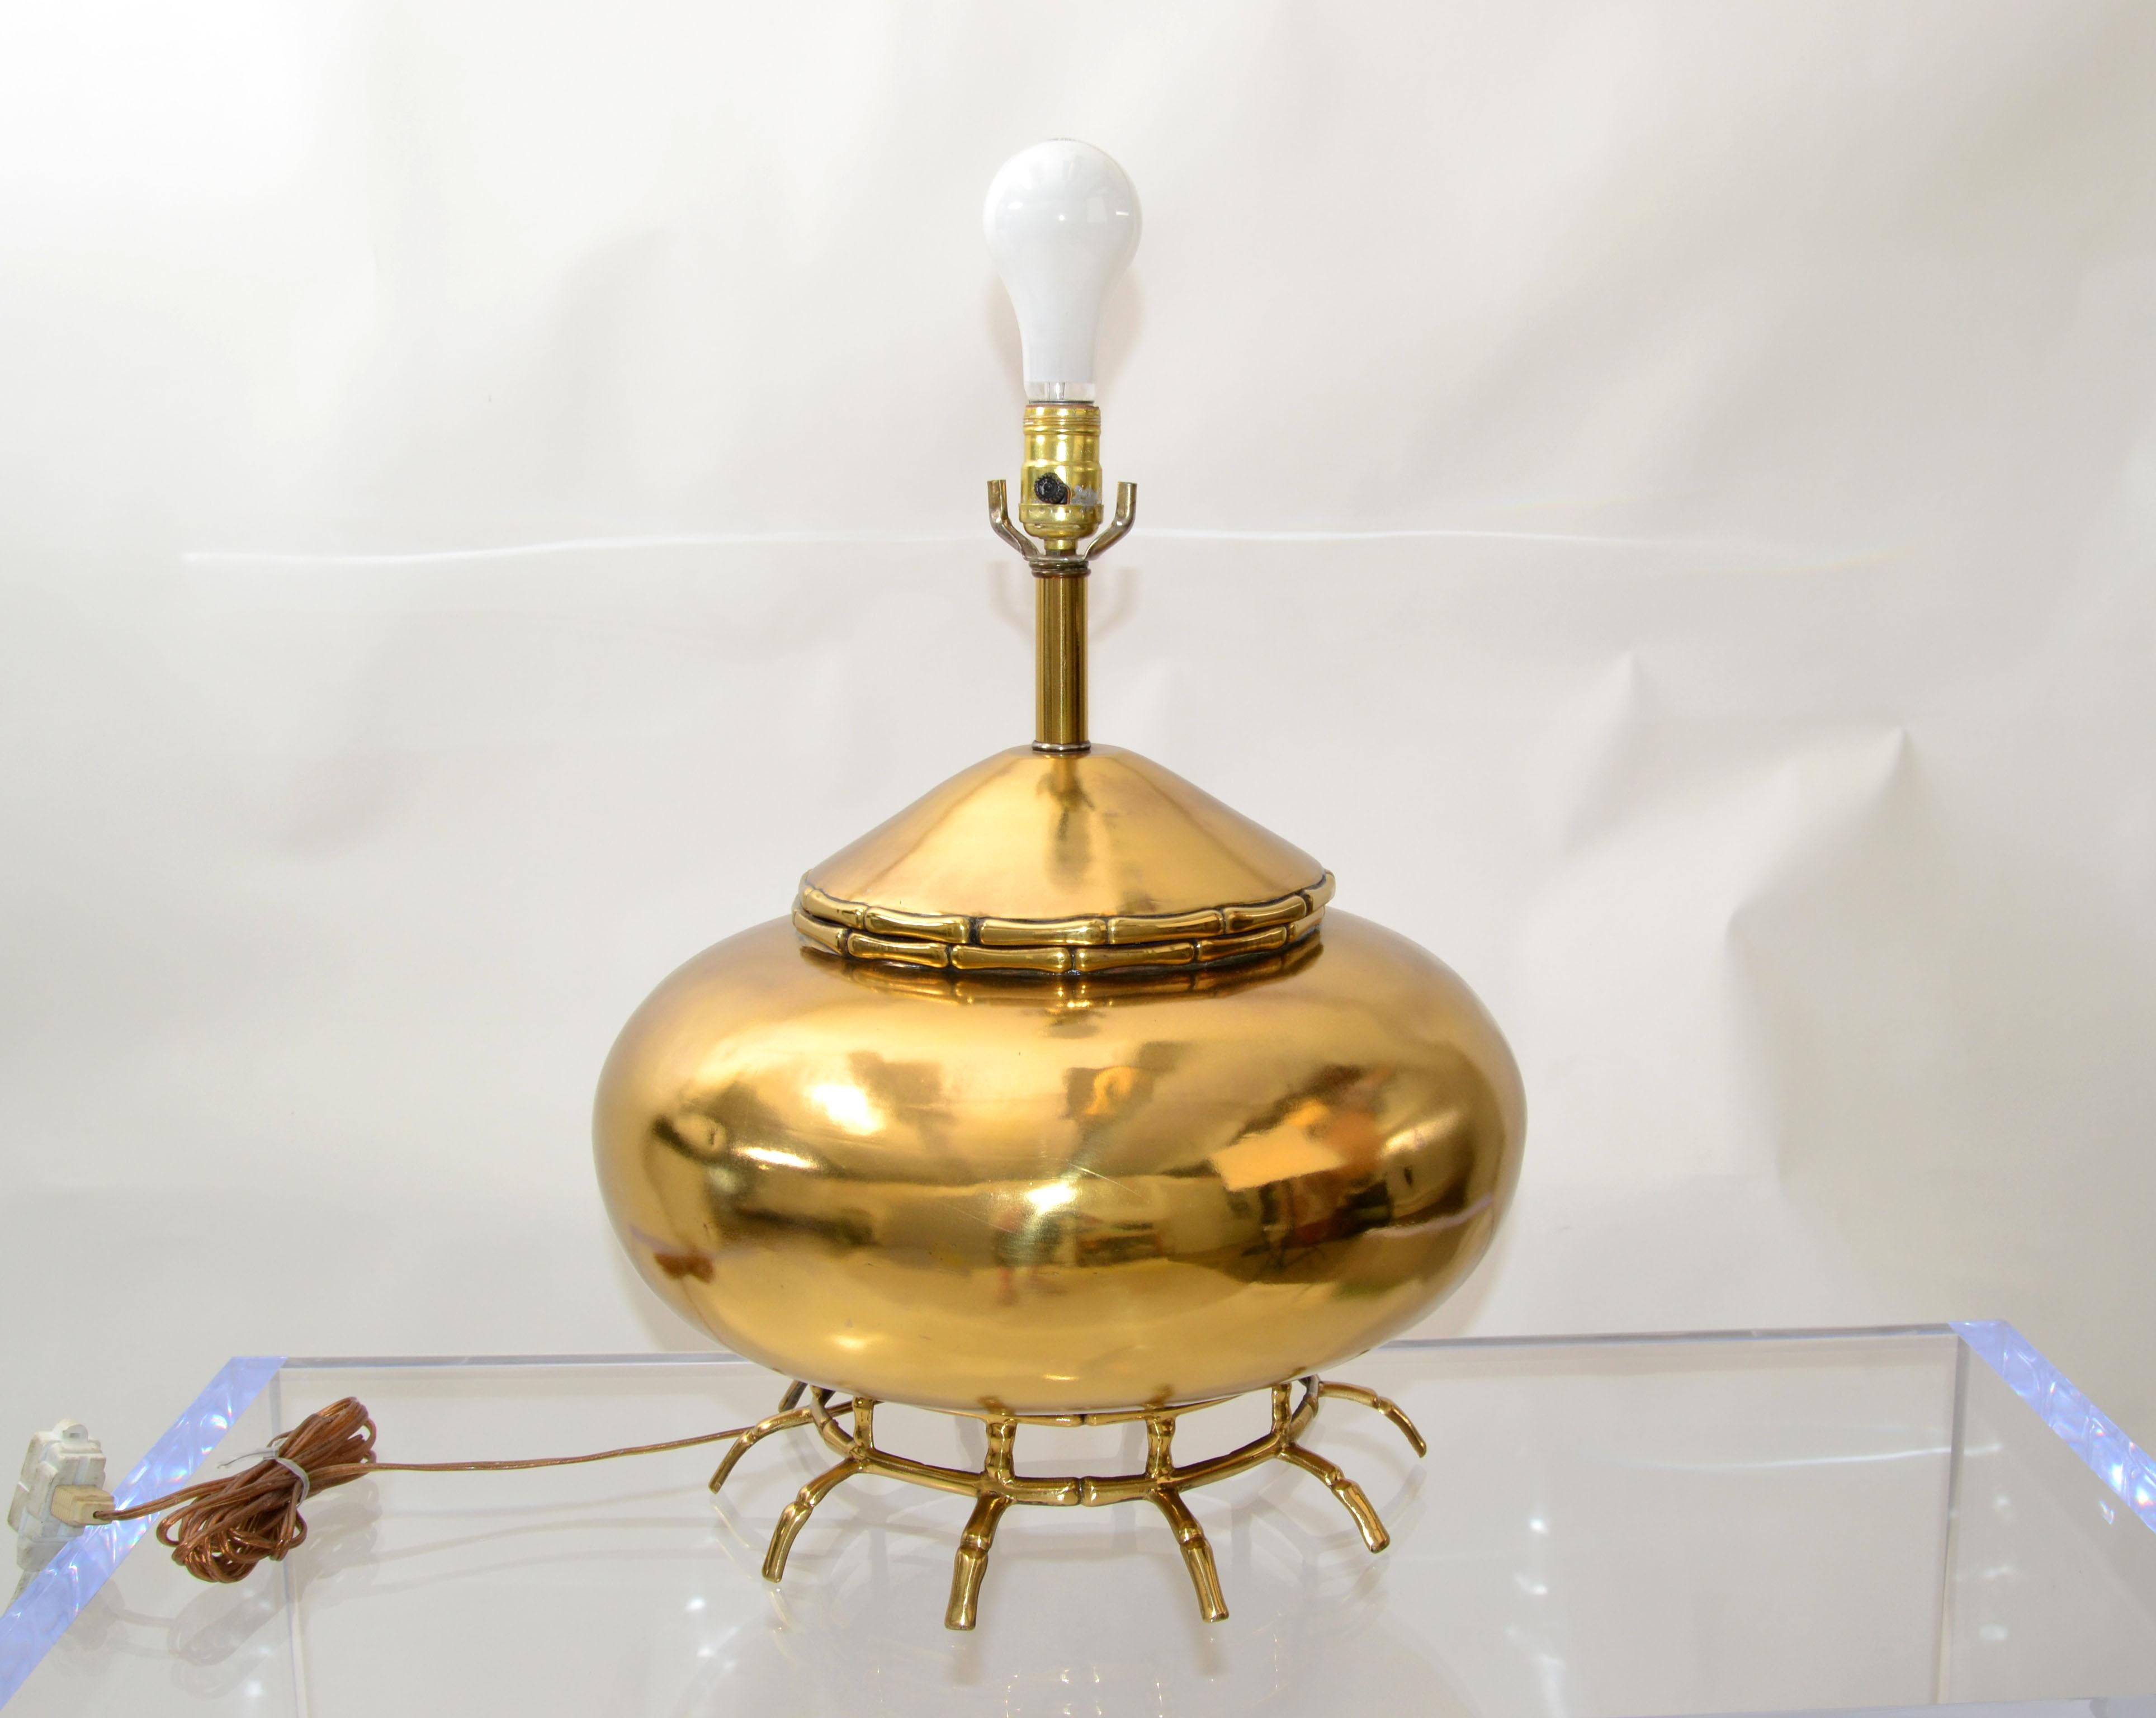 Mid-Century Modern round brass urn shape table lamp with spider legs.
In perfect 3 way working condition and uses a max. 150 watts light bulb.
Note: no shade, harp, finial.